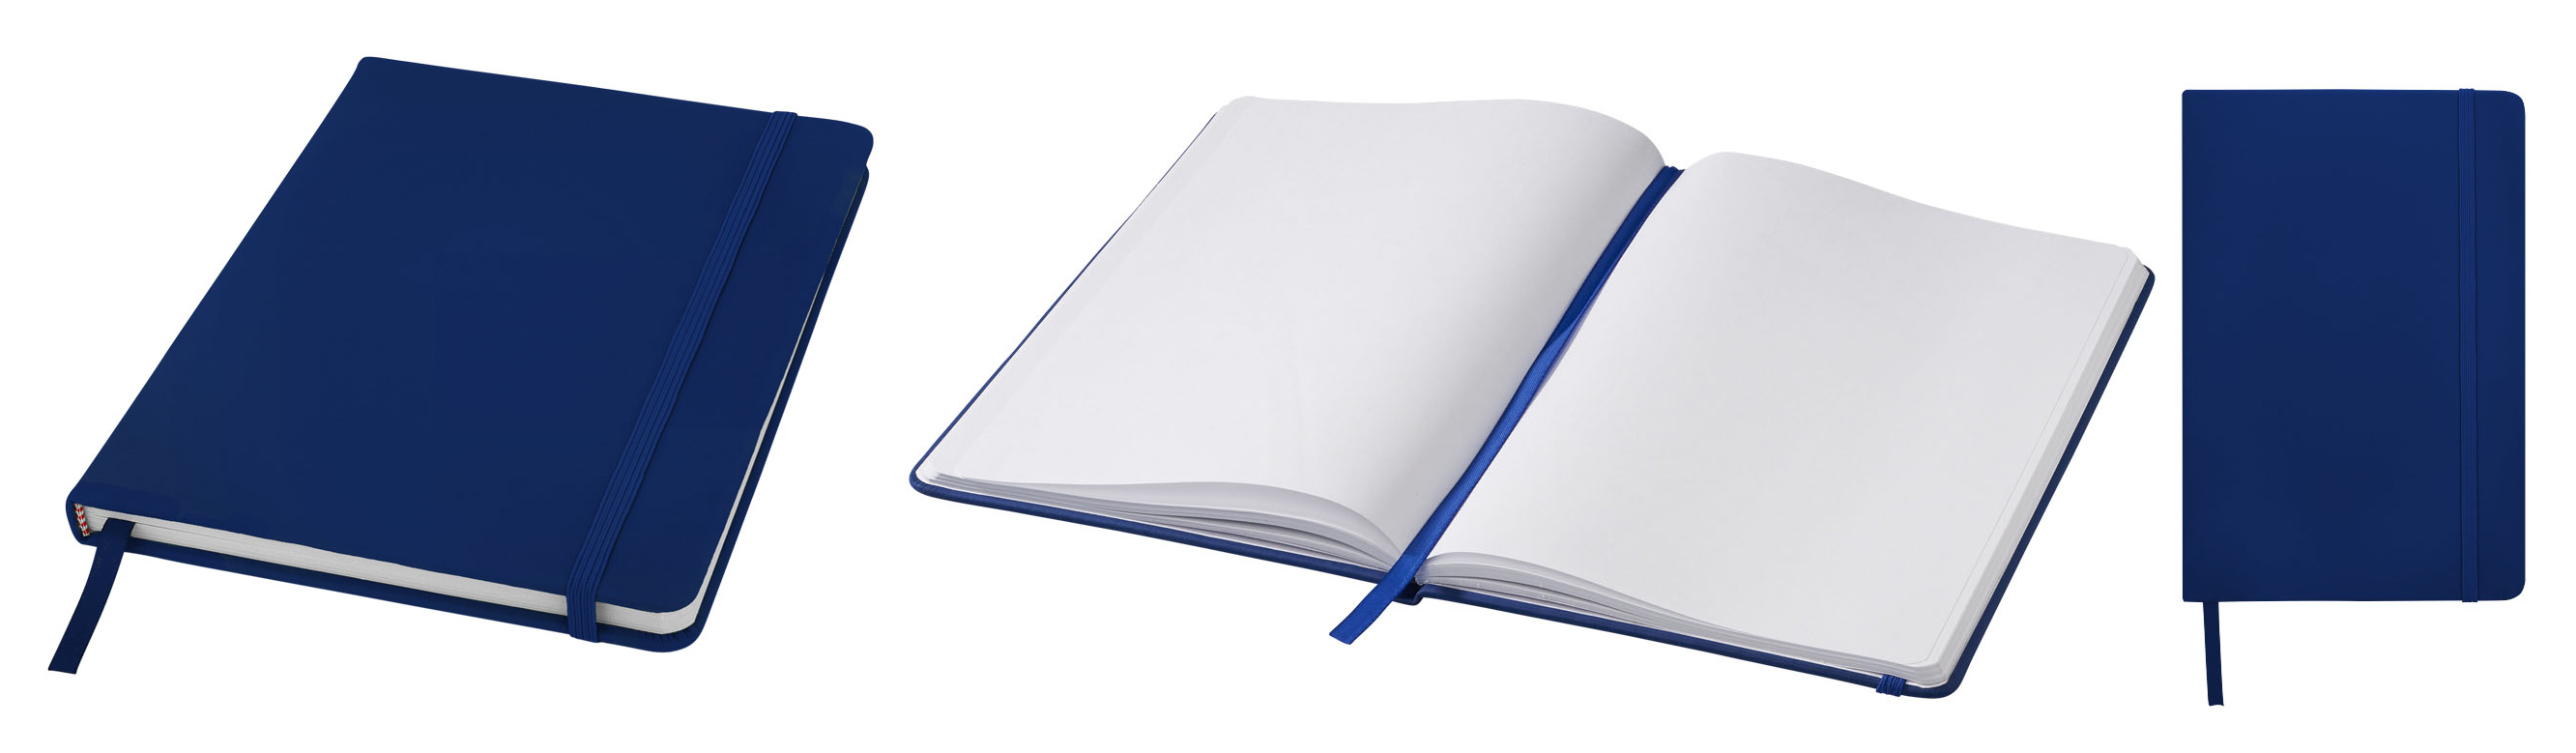 Promotional Spectrum A5 notebook with blank pages